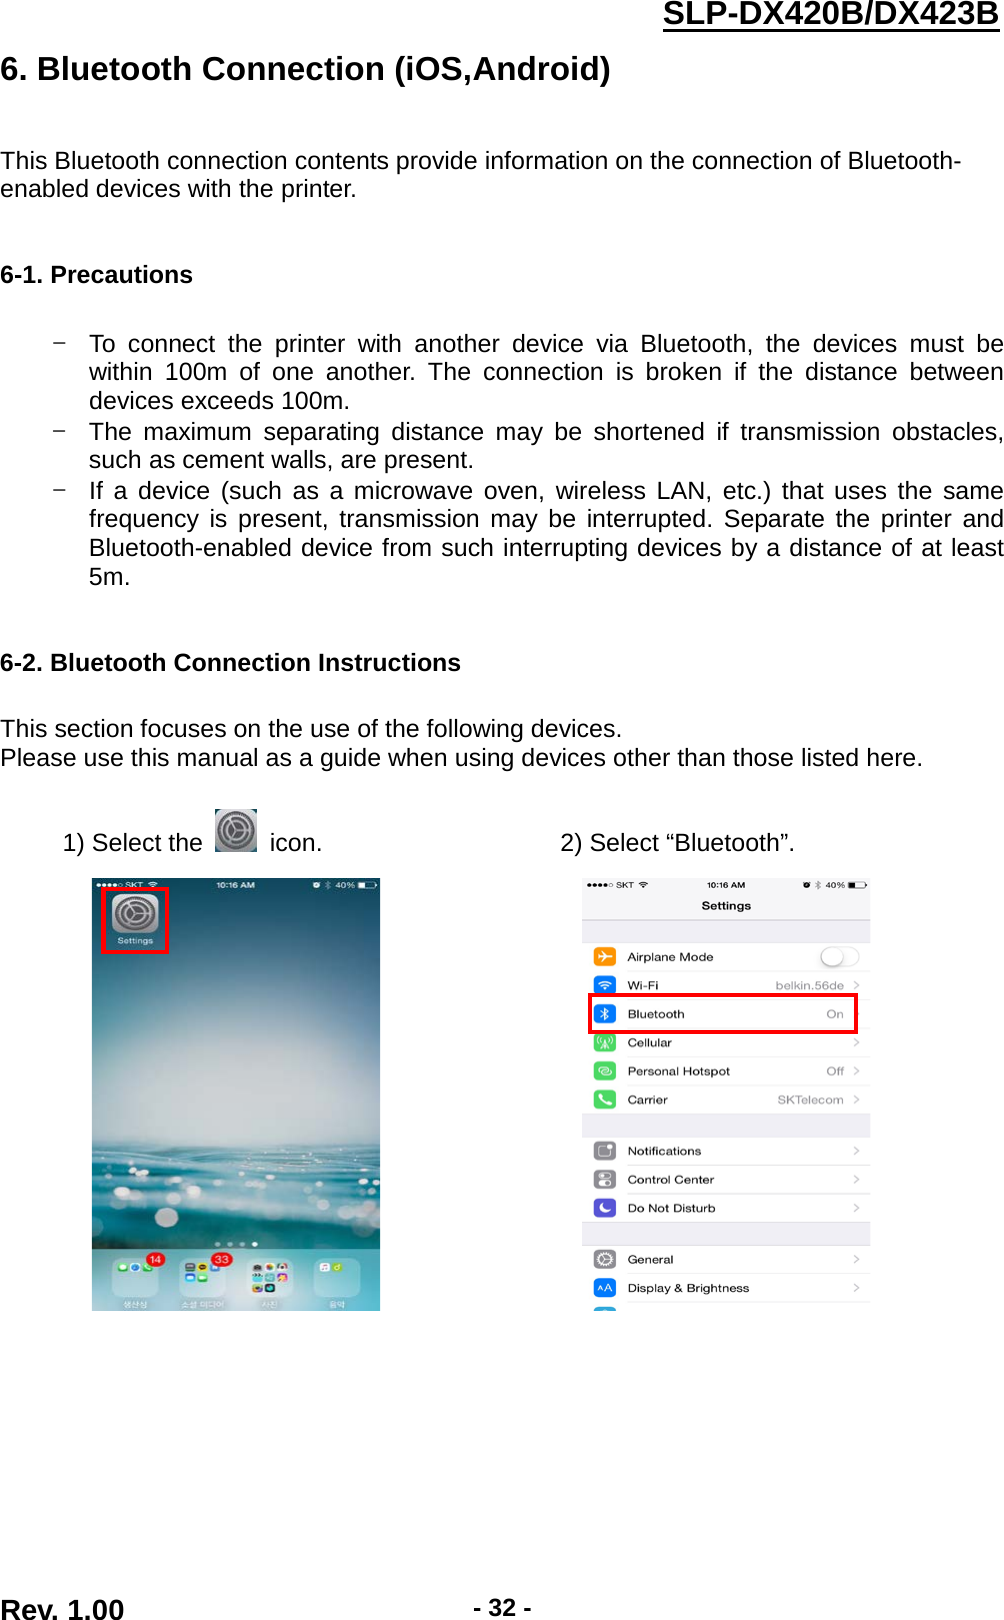  Rev. 1.00 - 32 - SLP-DX420B/DX423B  6. Bluetooth Connection (iOS,Android)   This Bluetooth connection contents provide information on the connection of Bluetooth- enabled devices with the printer.   6-1. Precautions  - To connect the printer with another device via Bluetooth, the devices must be within 100m of one another. The connection is broken if the distance between devices exceeds 100m. - The maximum separating distance may be shortened if transmission obstacles, such as cement walls, are present. - If a device (such as a microwave oven, wireless LAN, etc.) that uses the same frequency is present, transmission may be interrupted. Separate the printer and Bluetooth-enabled device from such interrupting devices by a distance of at least 5m.   6-2. Bluetooth Connection Instructions  This section focuses on the use of the following devices. Please use this manual as a guide when using devices other than those listed here.  1) Select the   icon.                   2) Select “Bluetooth”.                          